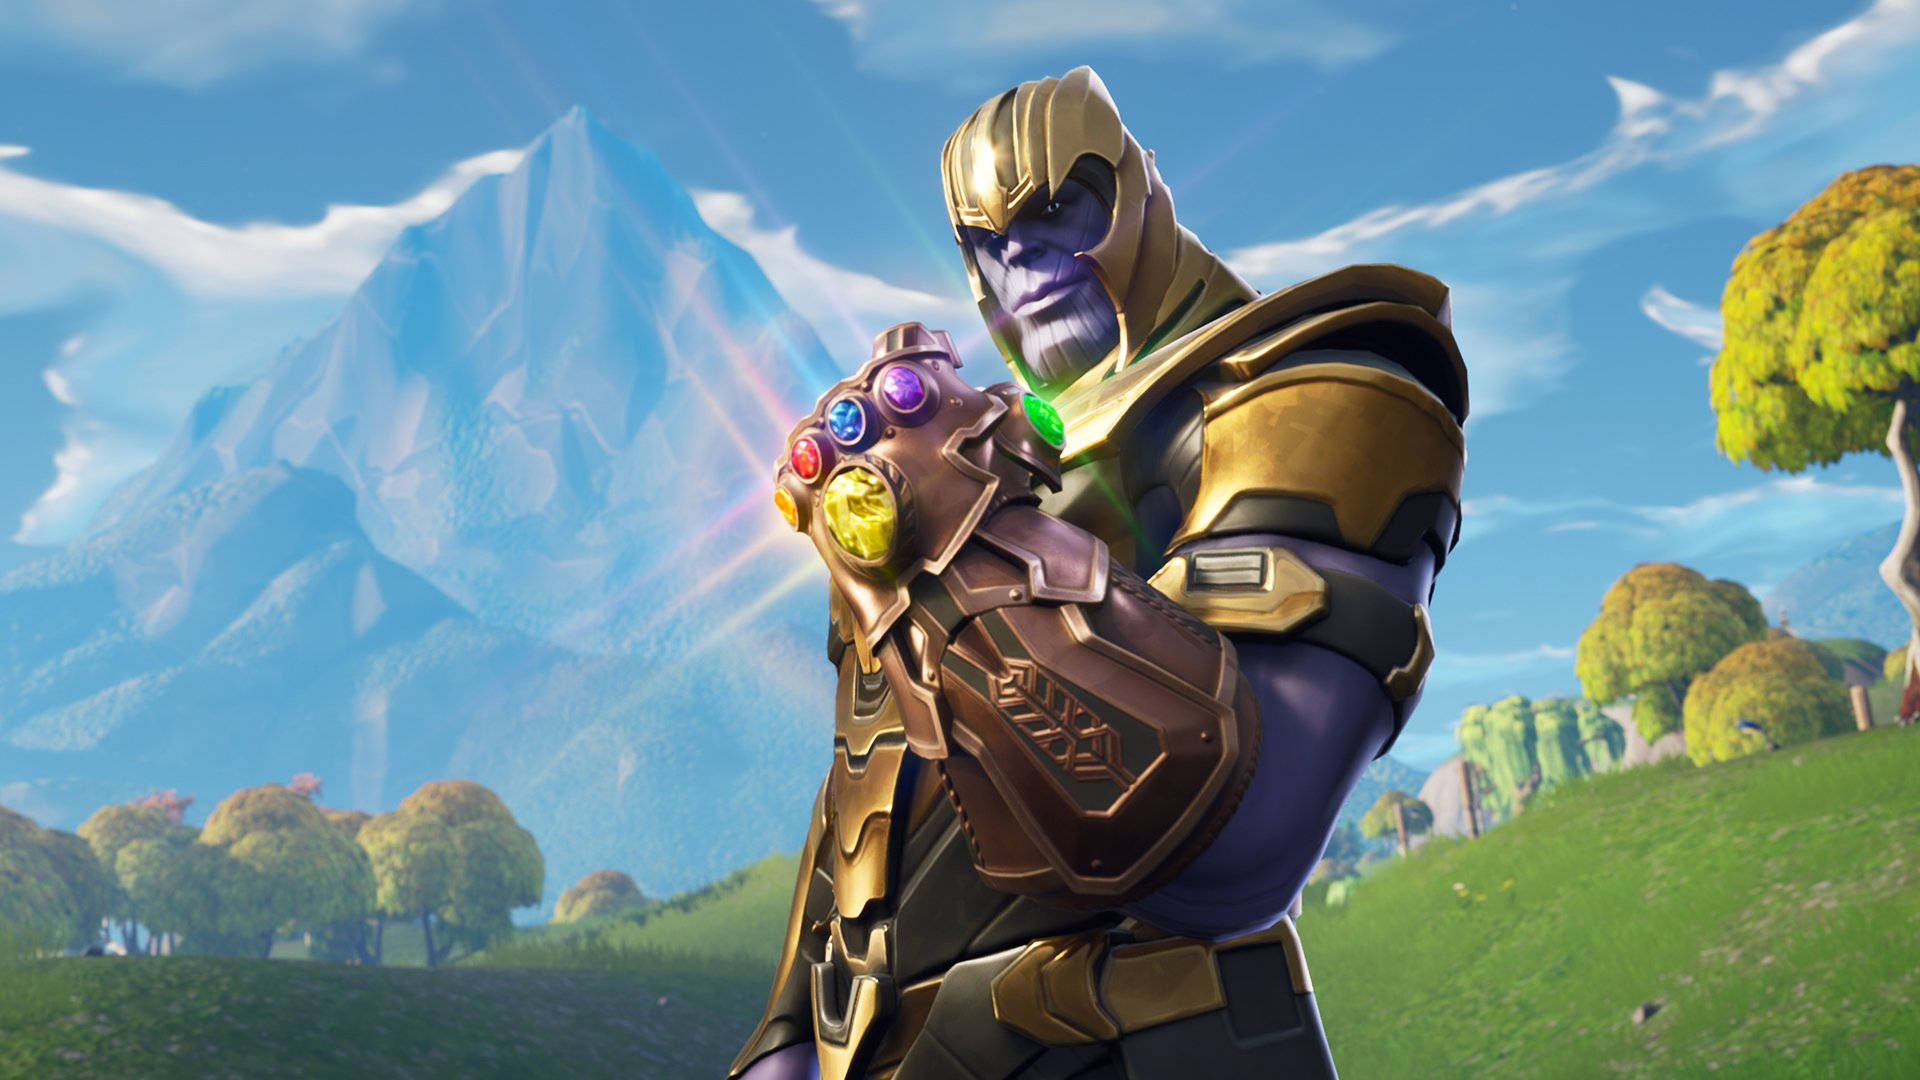 Cool Fortnite And Marvel Crossover